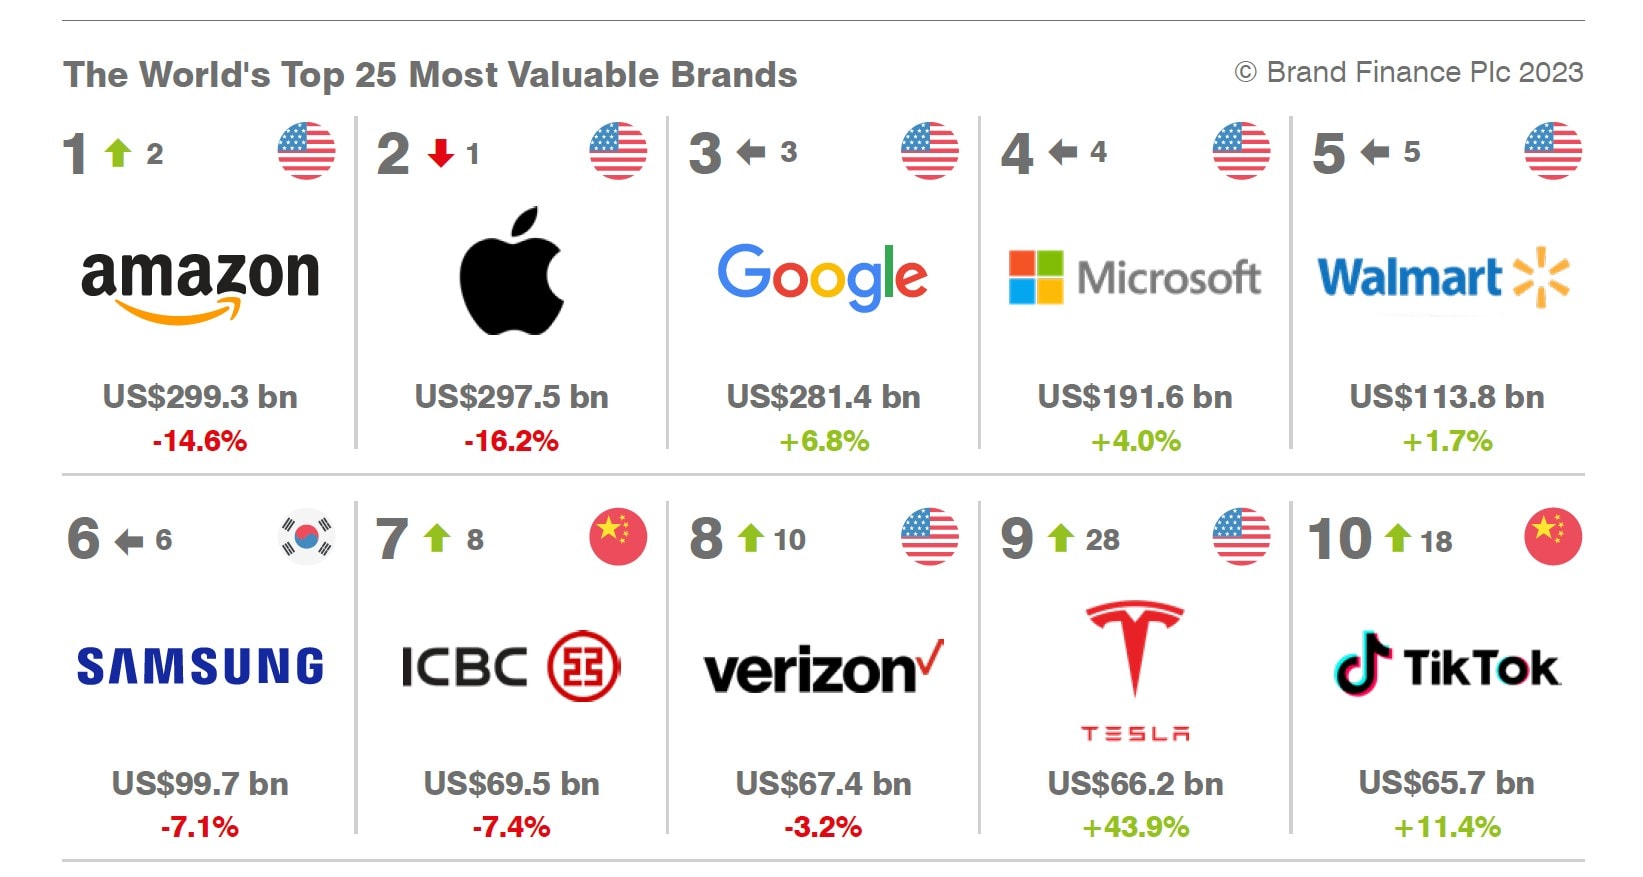 Tesla Climbs 19 Spots To Become One of the World's Top 10 Most Valuable ...